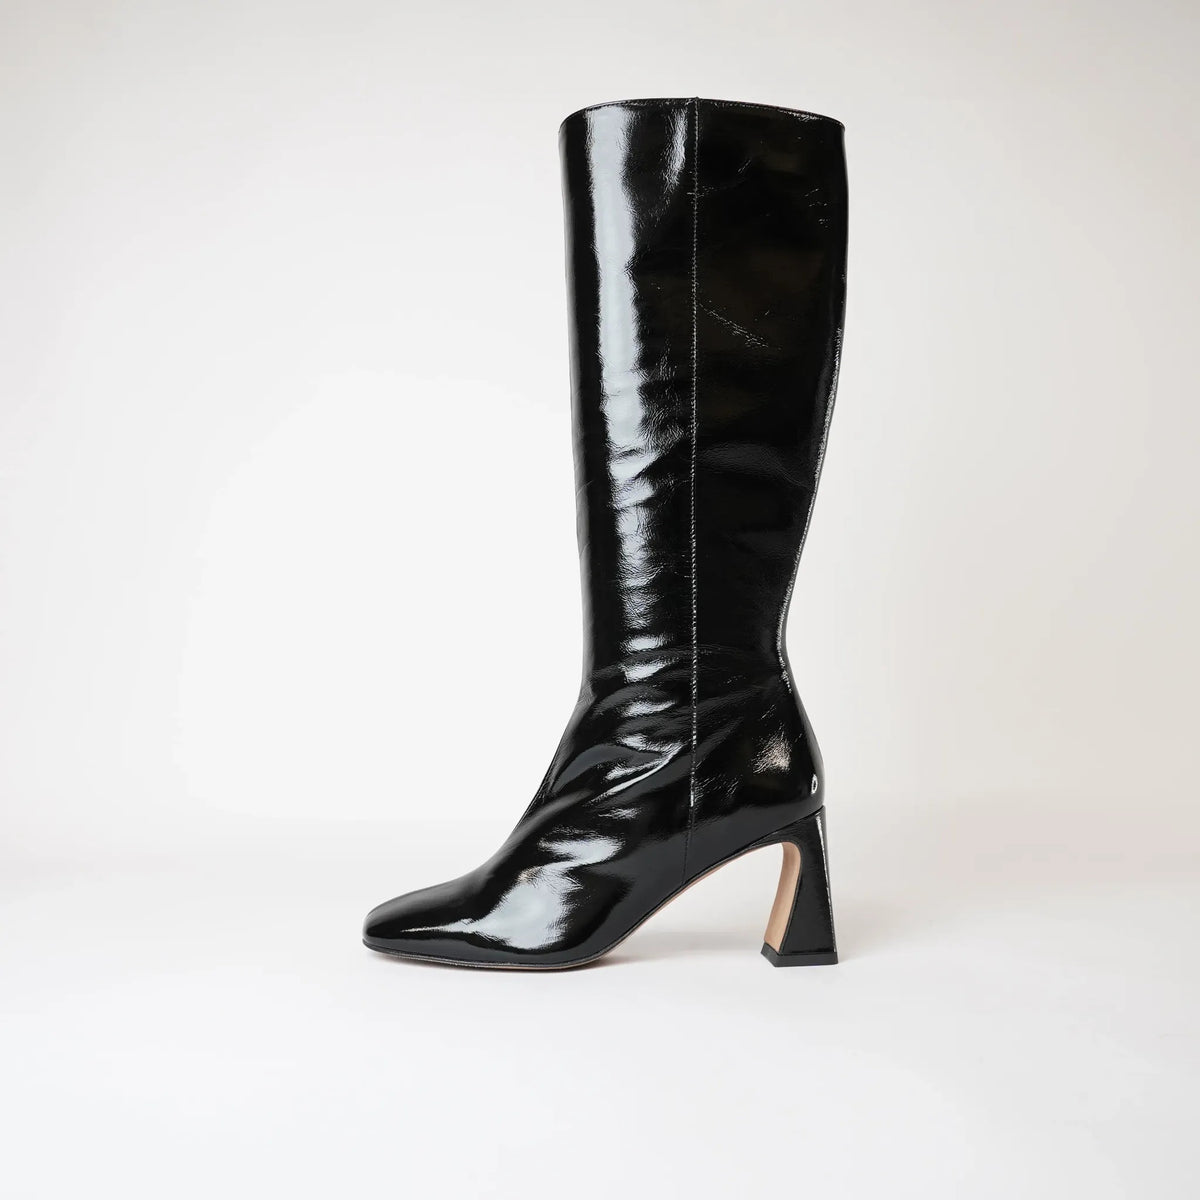 Ag-23596 Black Patent Knee High Boots